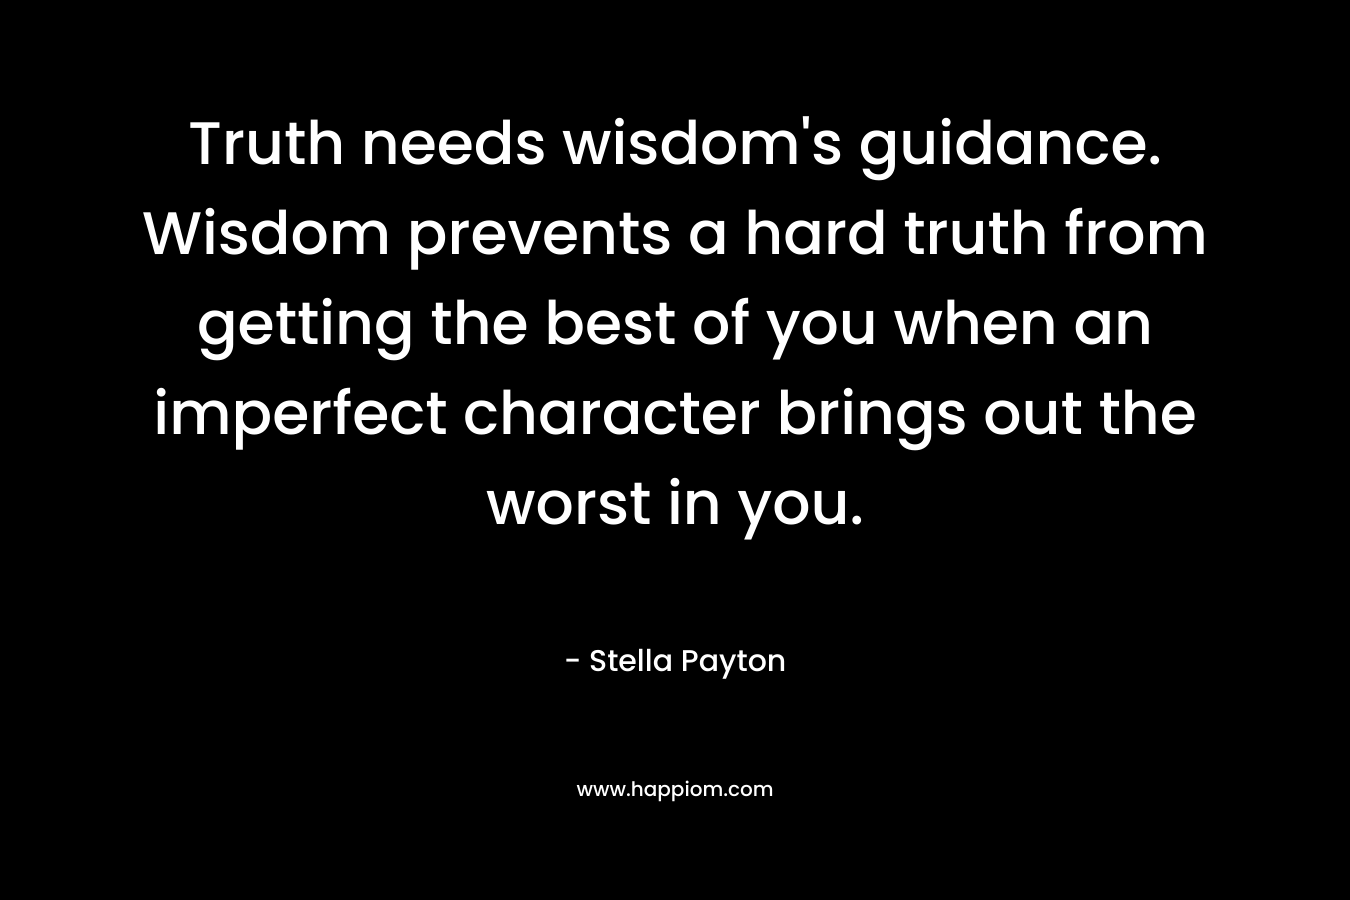 Truth needs wisdom’s guidance. Wisdom prevents a hard truth from getting the best of you when an imperfect character brings out the worst in you. – Stella Payton